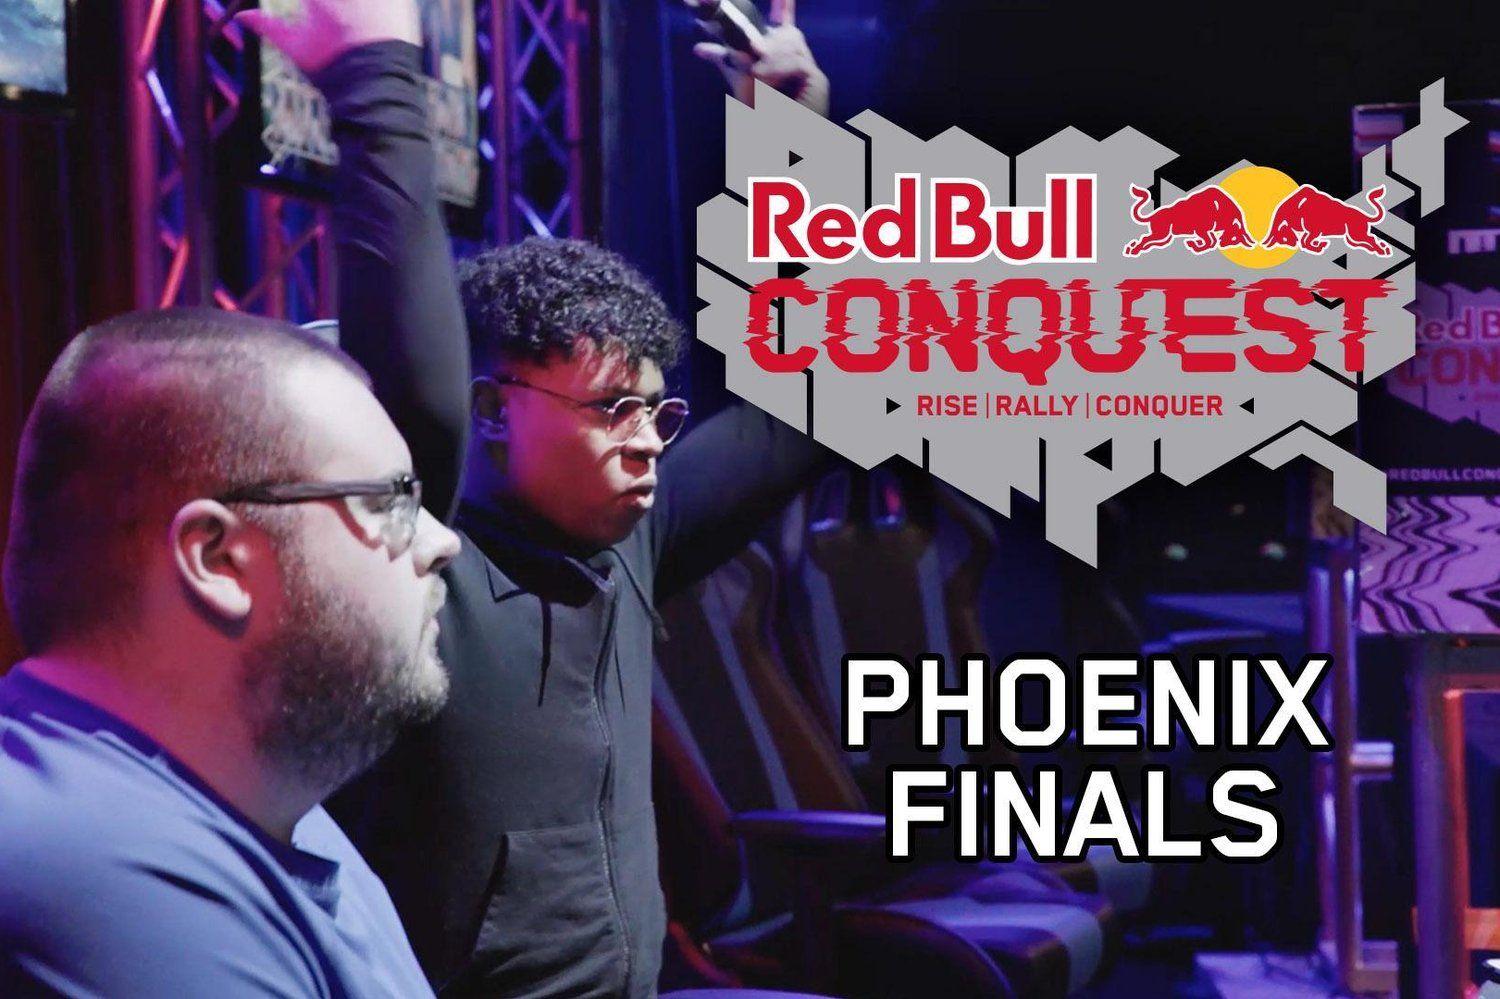 Phoenix Mixed with Red Bull Logo - Red Bull Conquest Phoenix Highlights